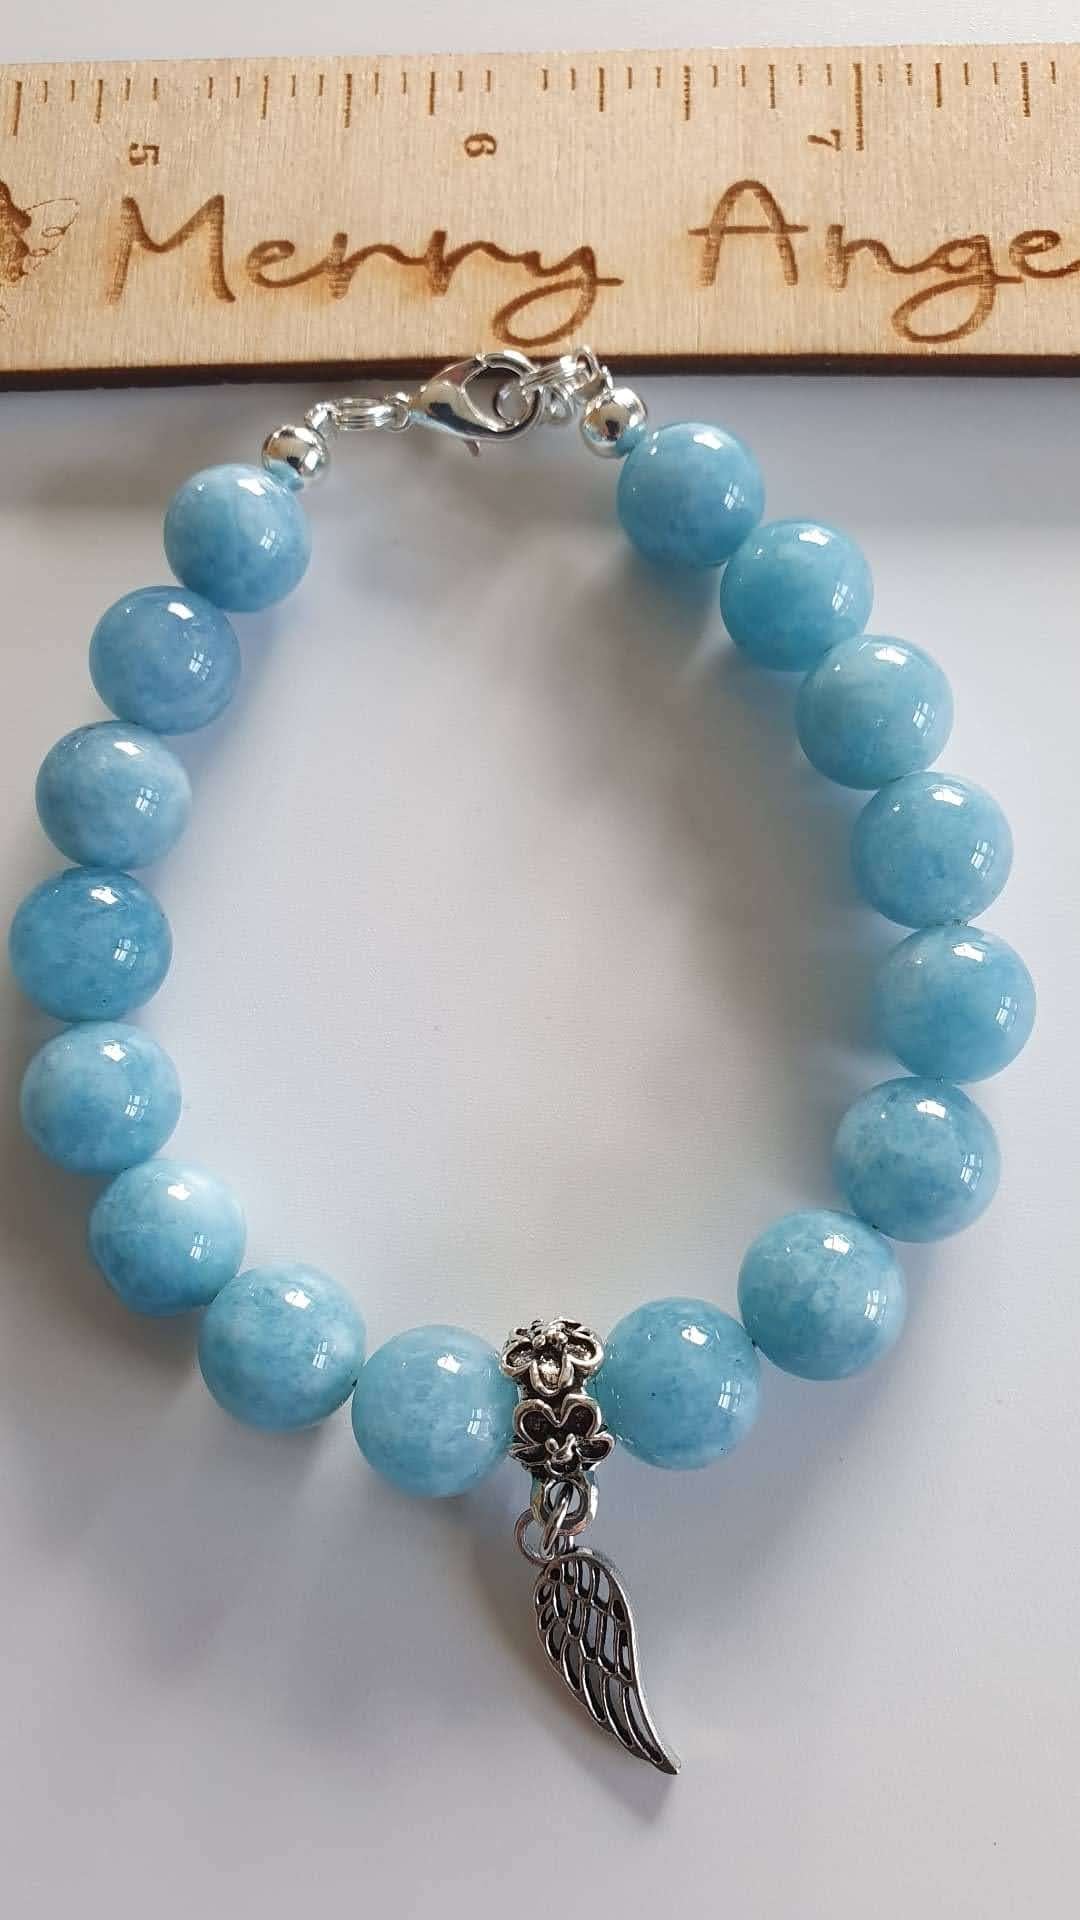 This is a picture of a blue angel wing bracelet